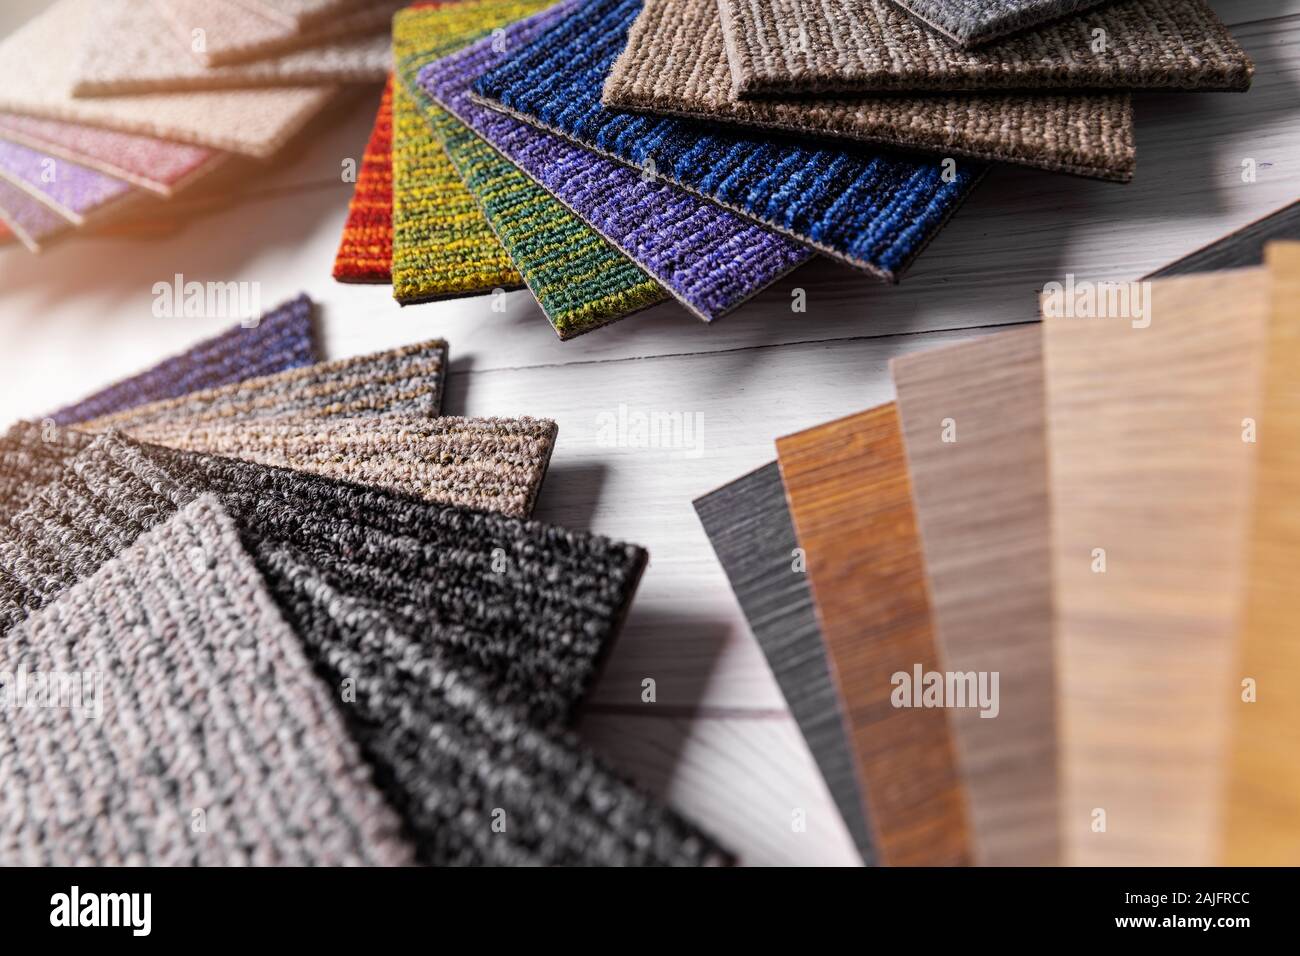 flooring and furniture materials - floor carpet and wooden laminate samples Stock Photo